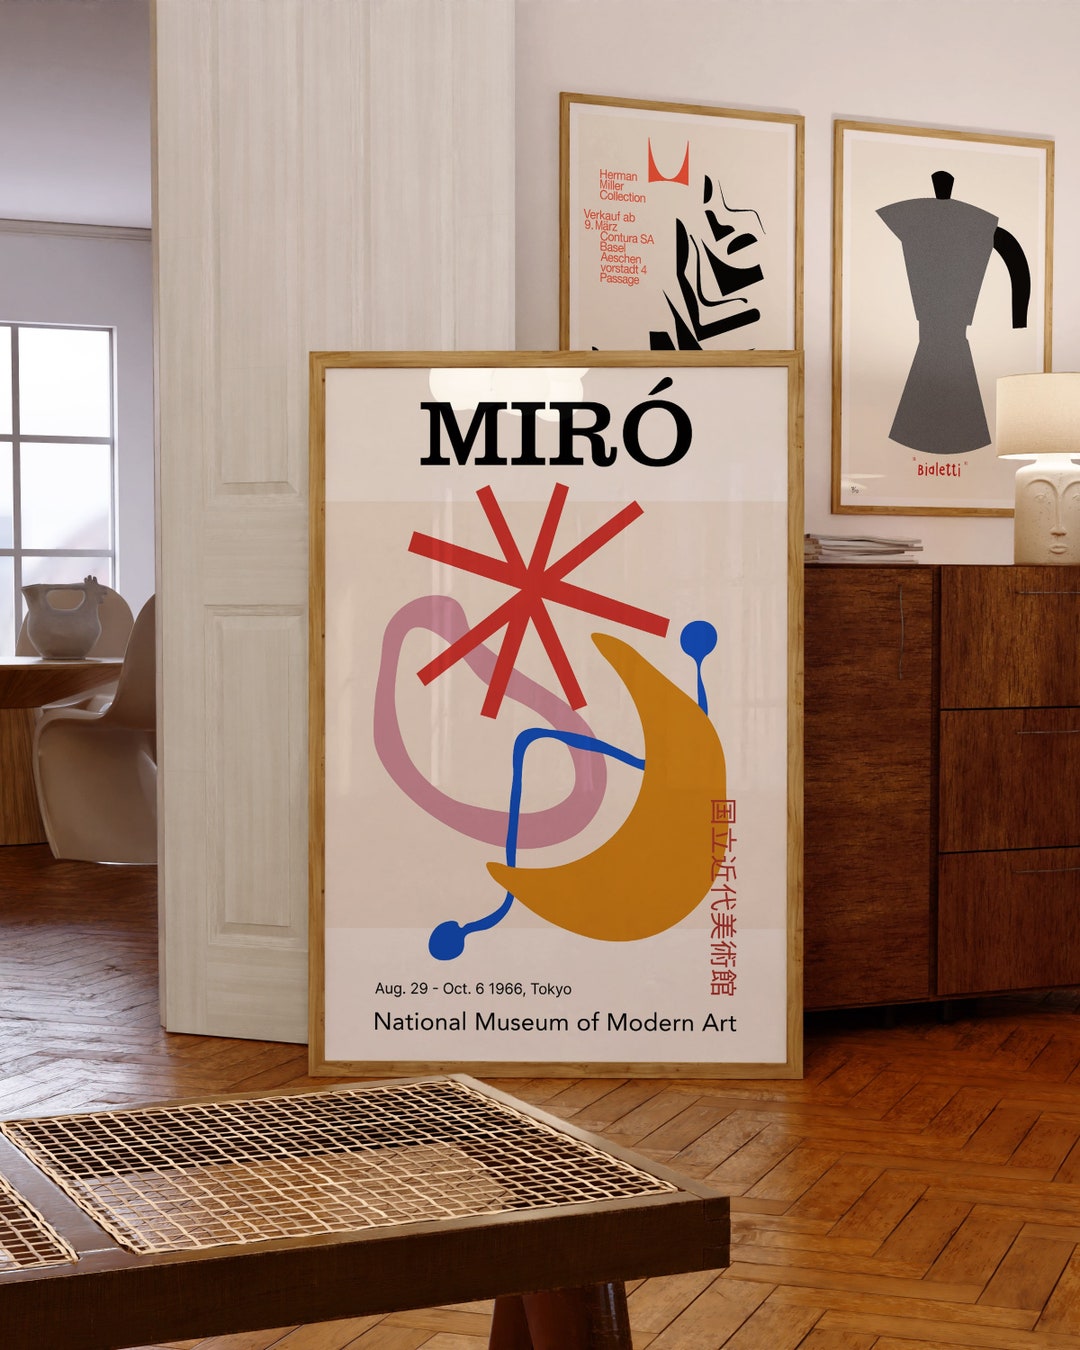 Joan Miró Exhibition Art, of Poster Modern 1966 Poster Modern Mid-century National Tokyo, - Museum Etsy